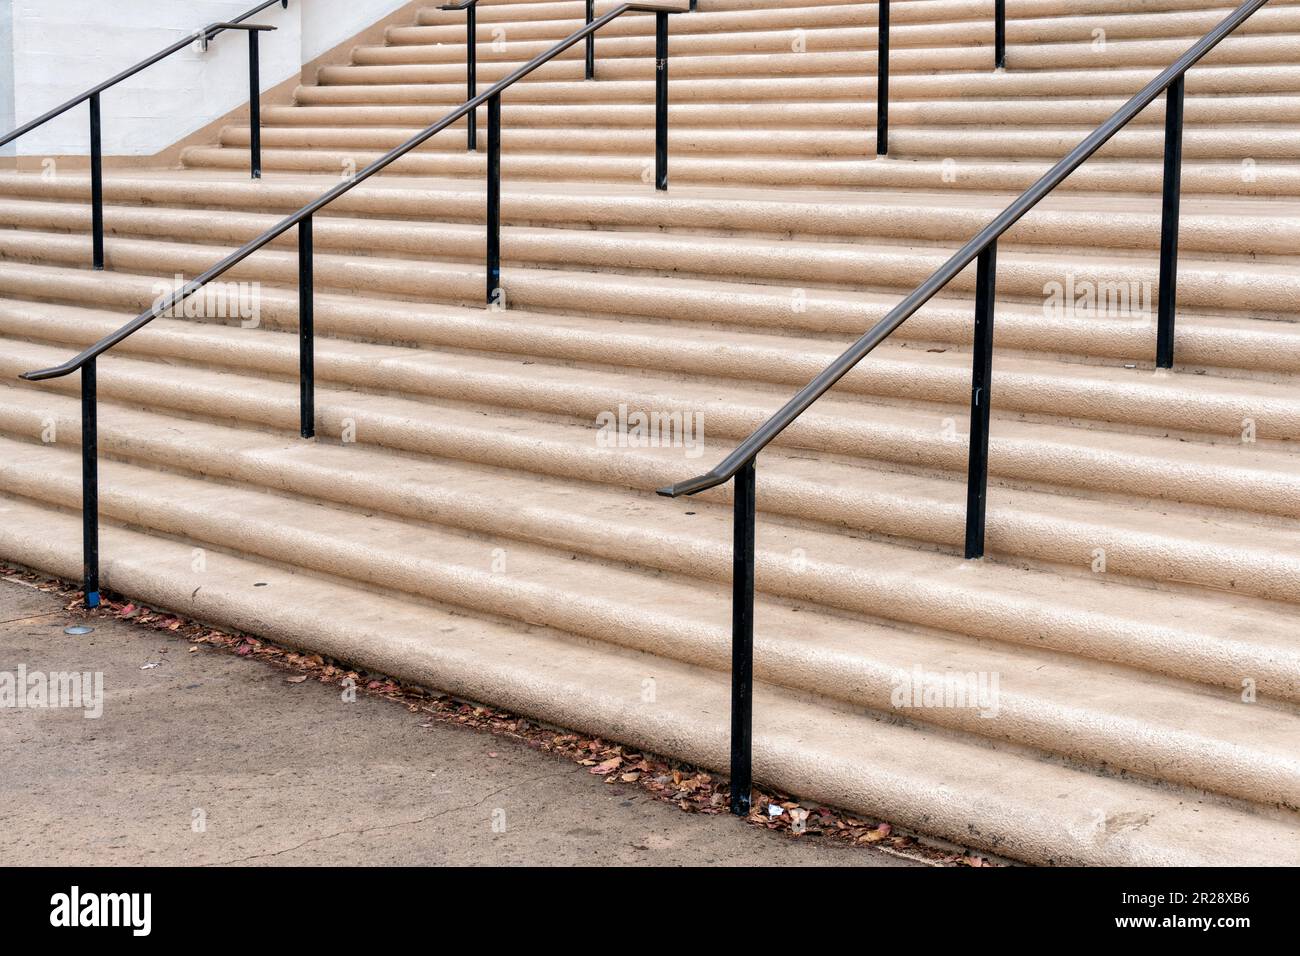 Old concrete staircase with metal handrails Stock Photo